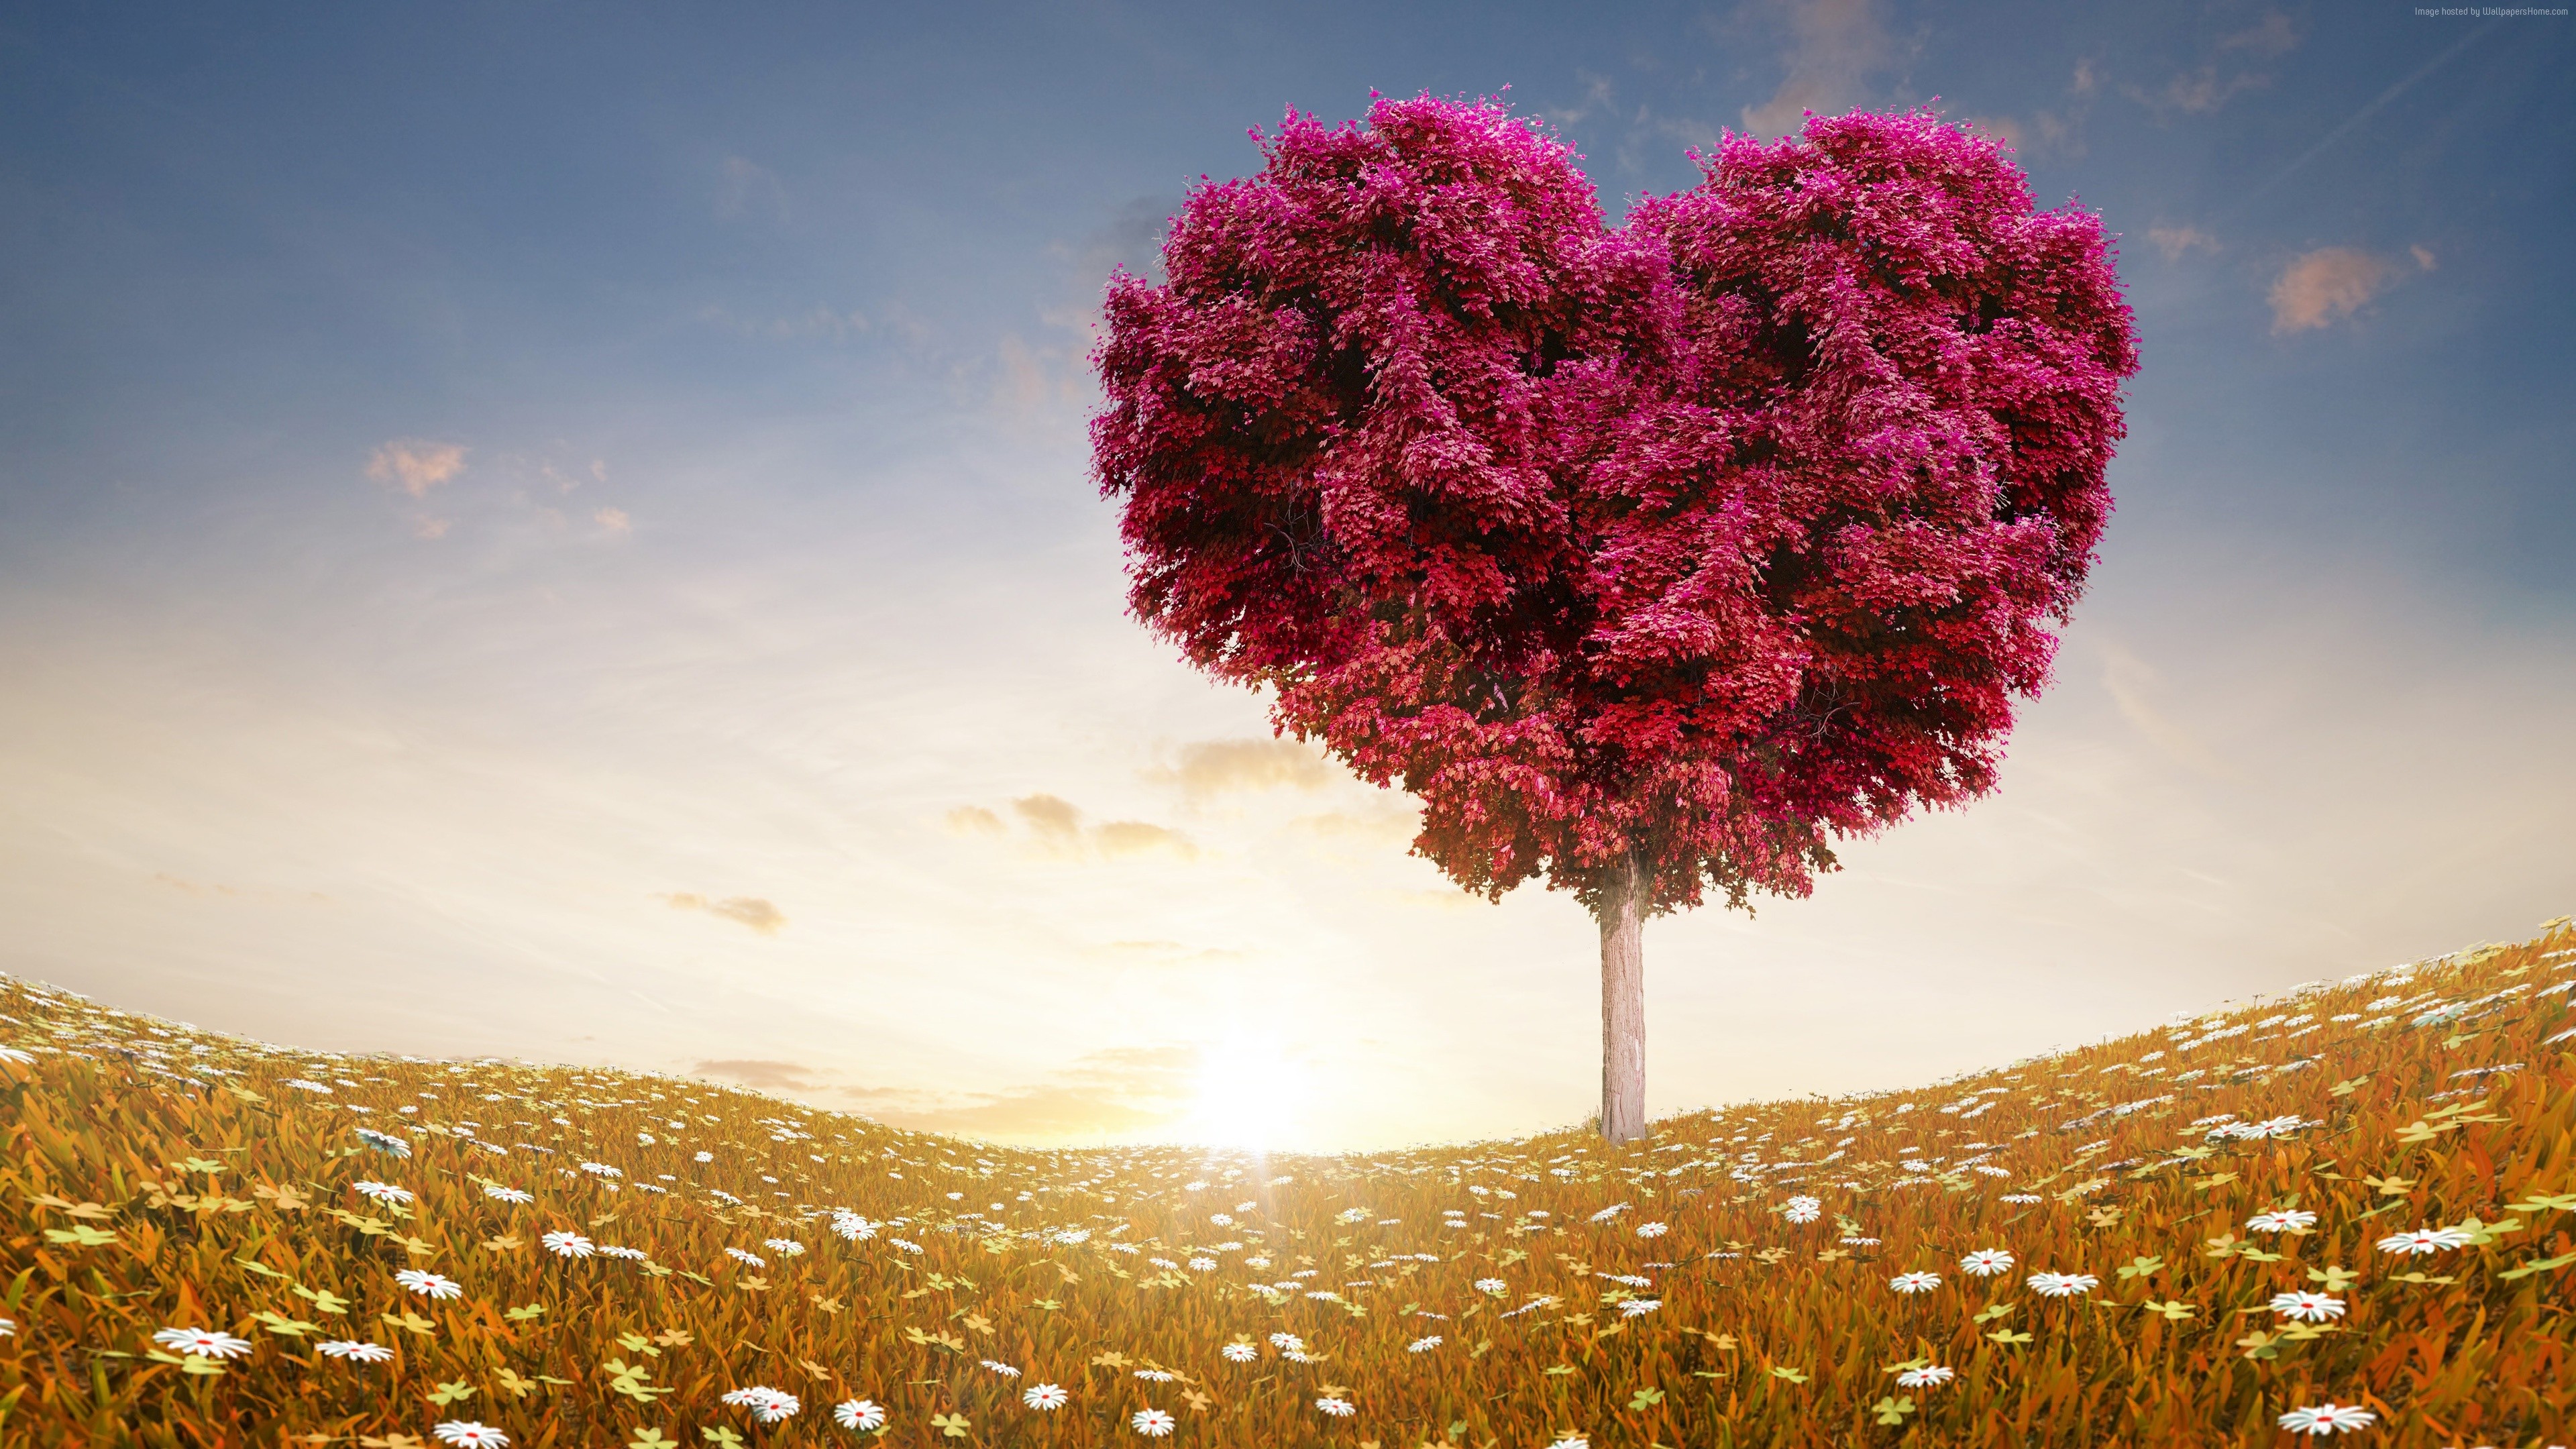 Stock Images love image, heart, 4k, tree, Stock Images